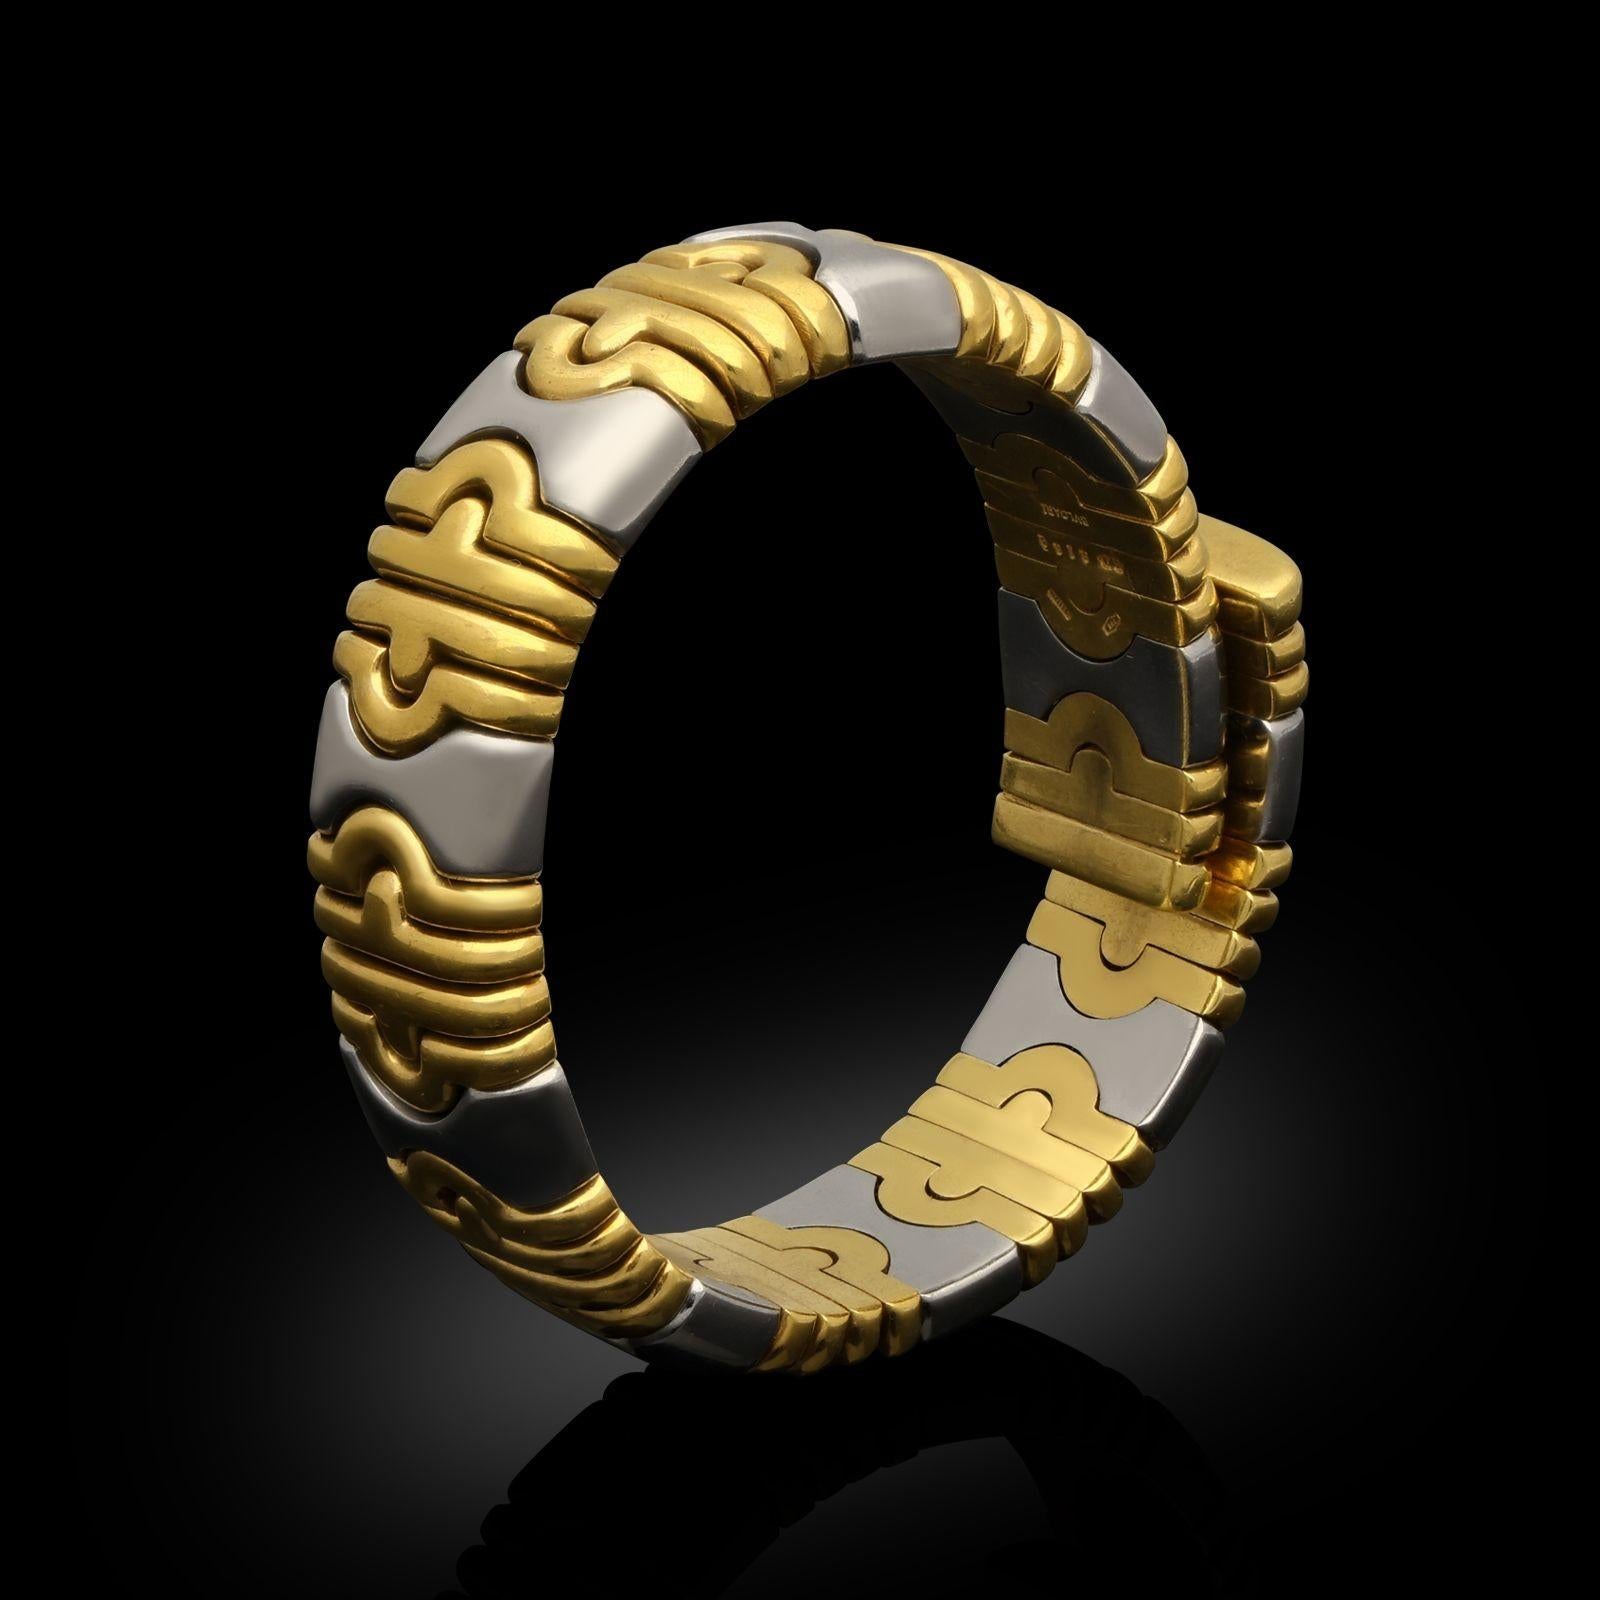 An 18ct yellow gold and stainless steel 'Parentesi' cuff bracelet by Bulgari. The bracelet is one of the iconic Bulgari designs with alternating 18ct yellow gold and stainless steel links. The bracelet is articulated and